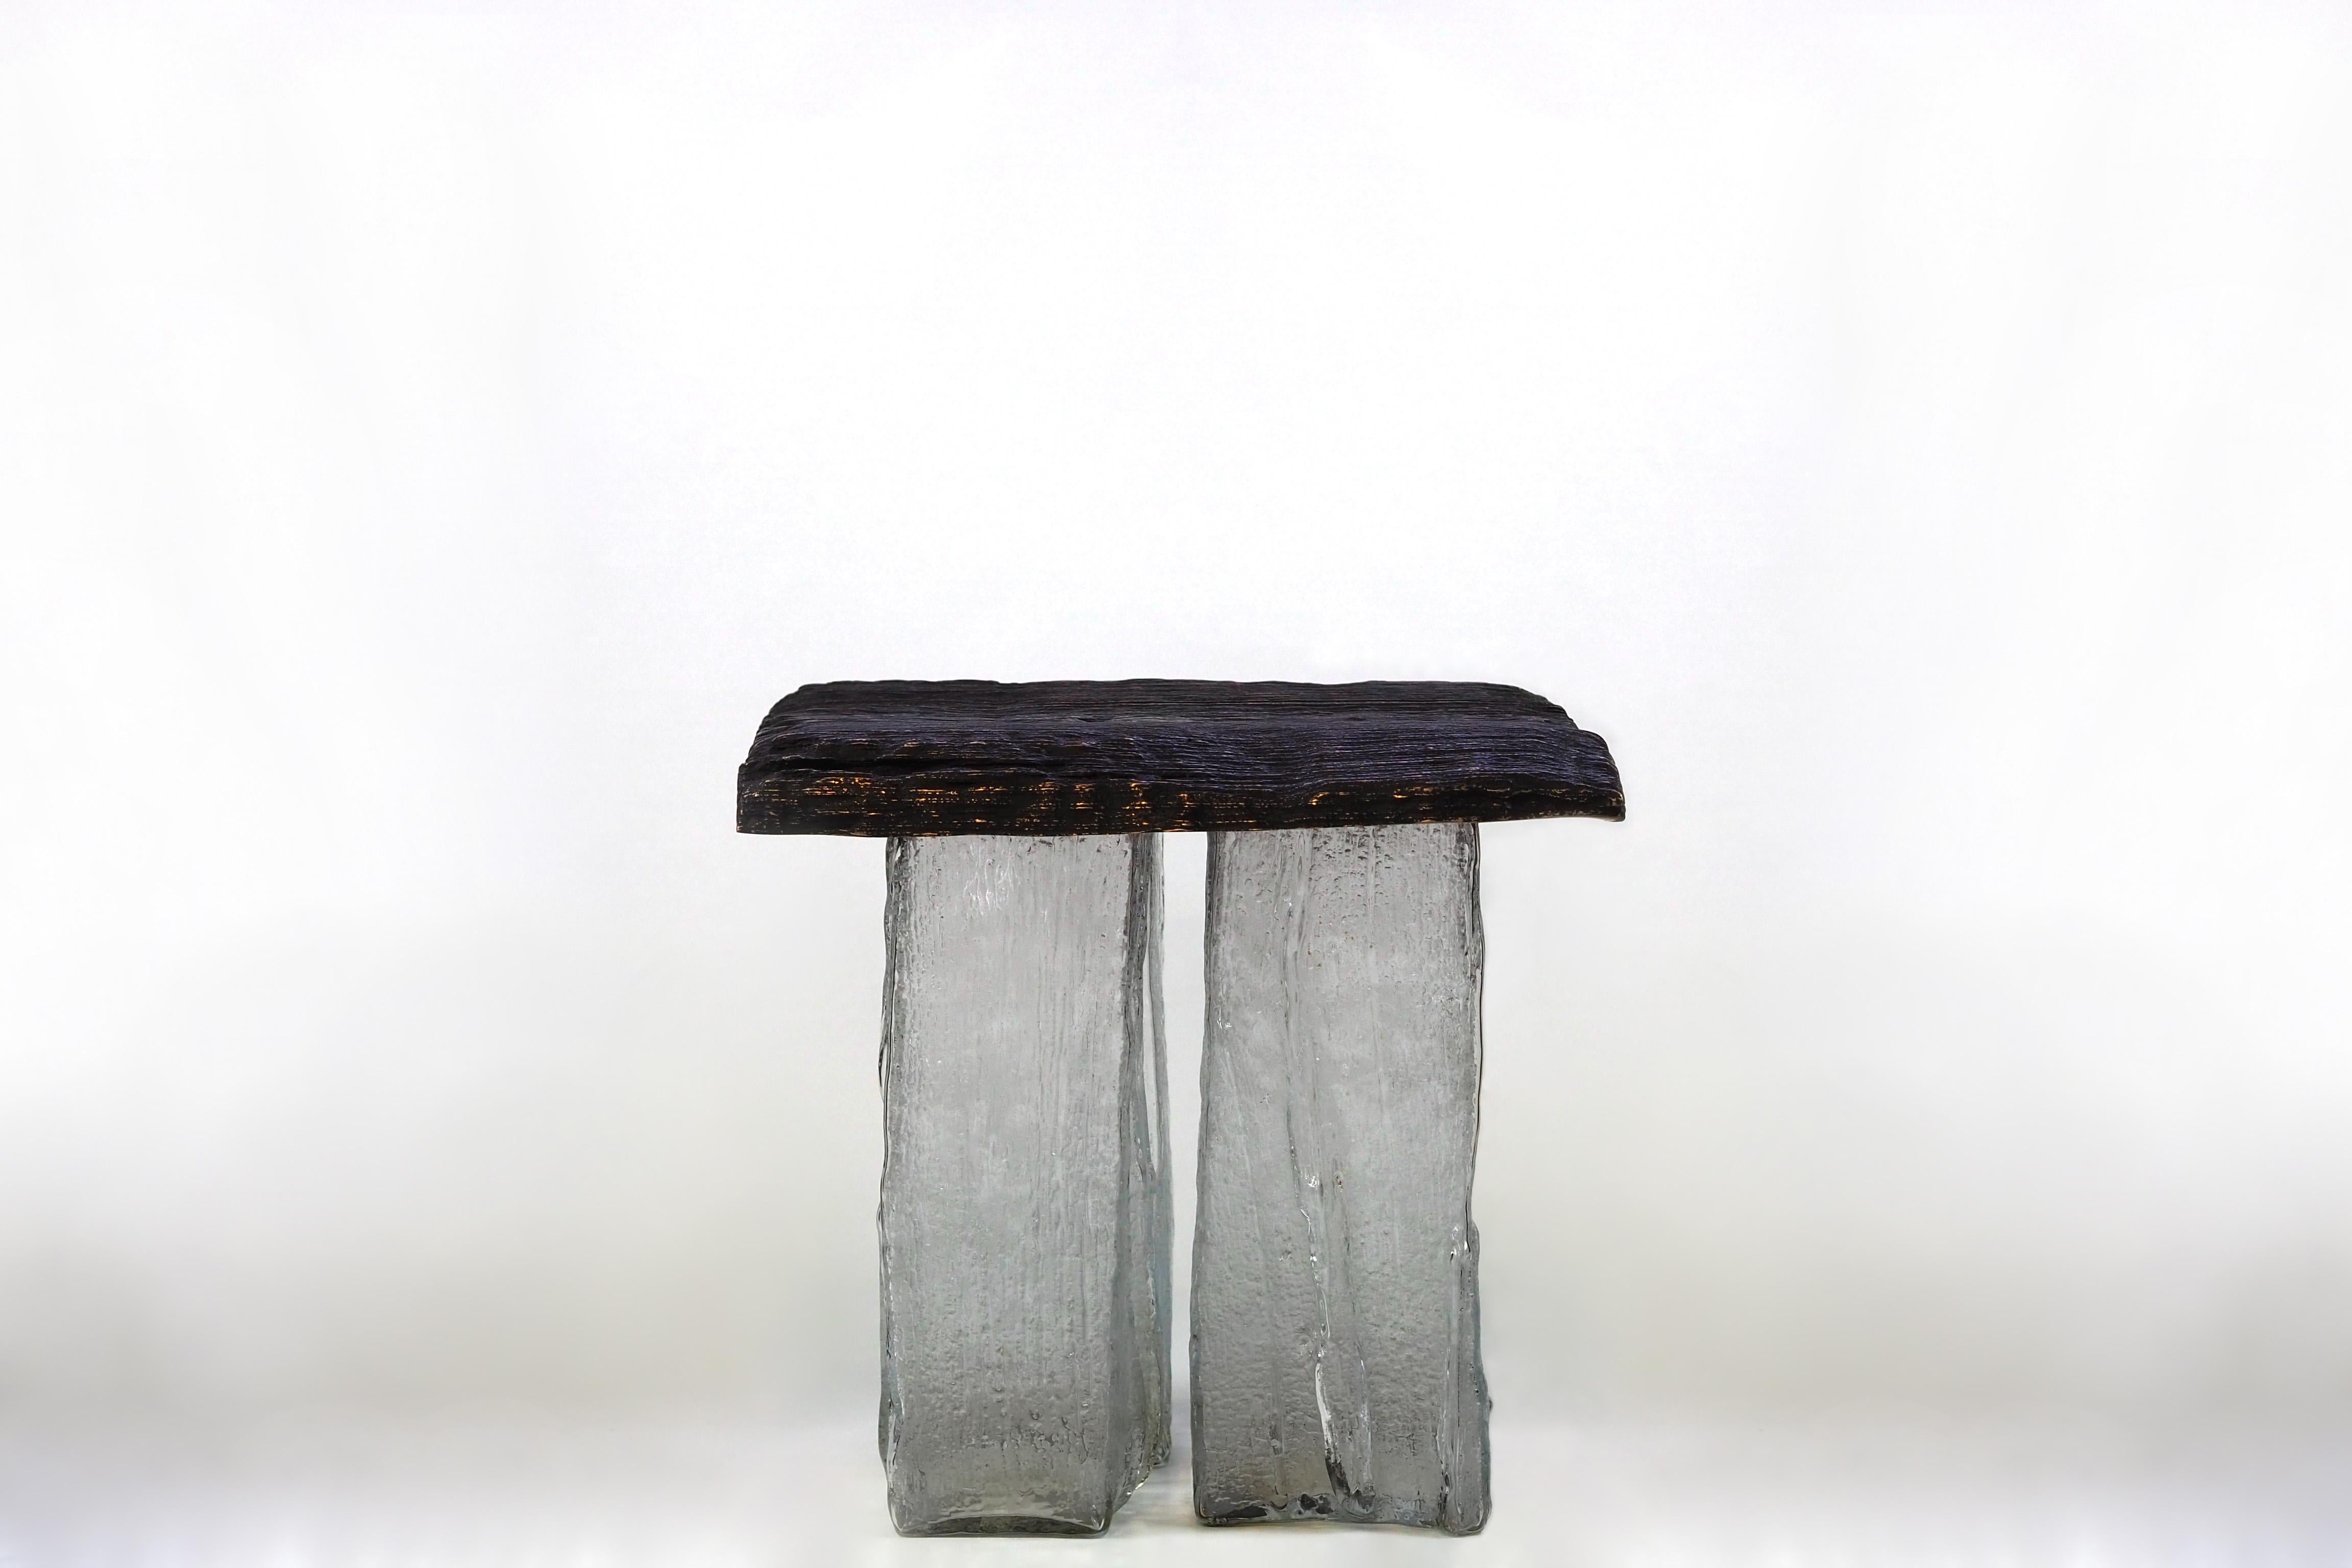 Madeira Table by Clément Thevenot
Limited Edition Of 12 Pieces.
Designed by Clément Thevenot and Joyce Broussillou.
Dimensions: D 50 x W 50 x H 45,5 cm.
Materials: Cast bronze, wood texture glass and resin fixing system.

Each copy is unique, has